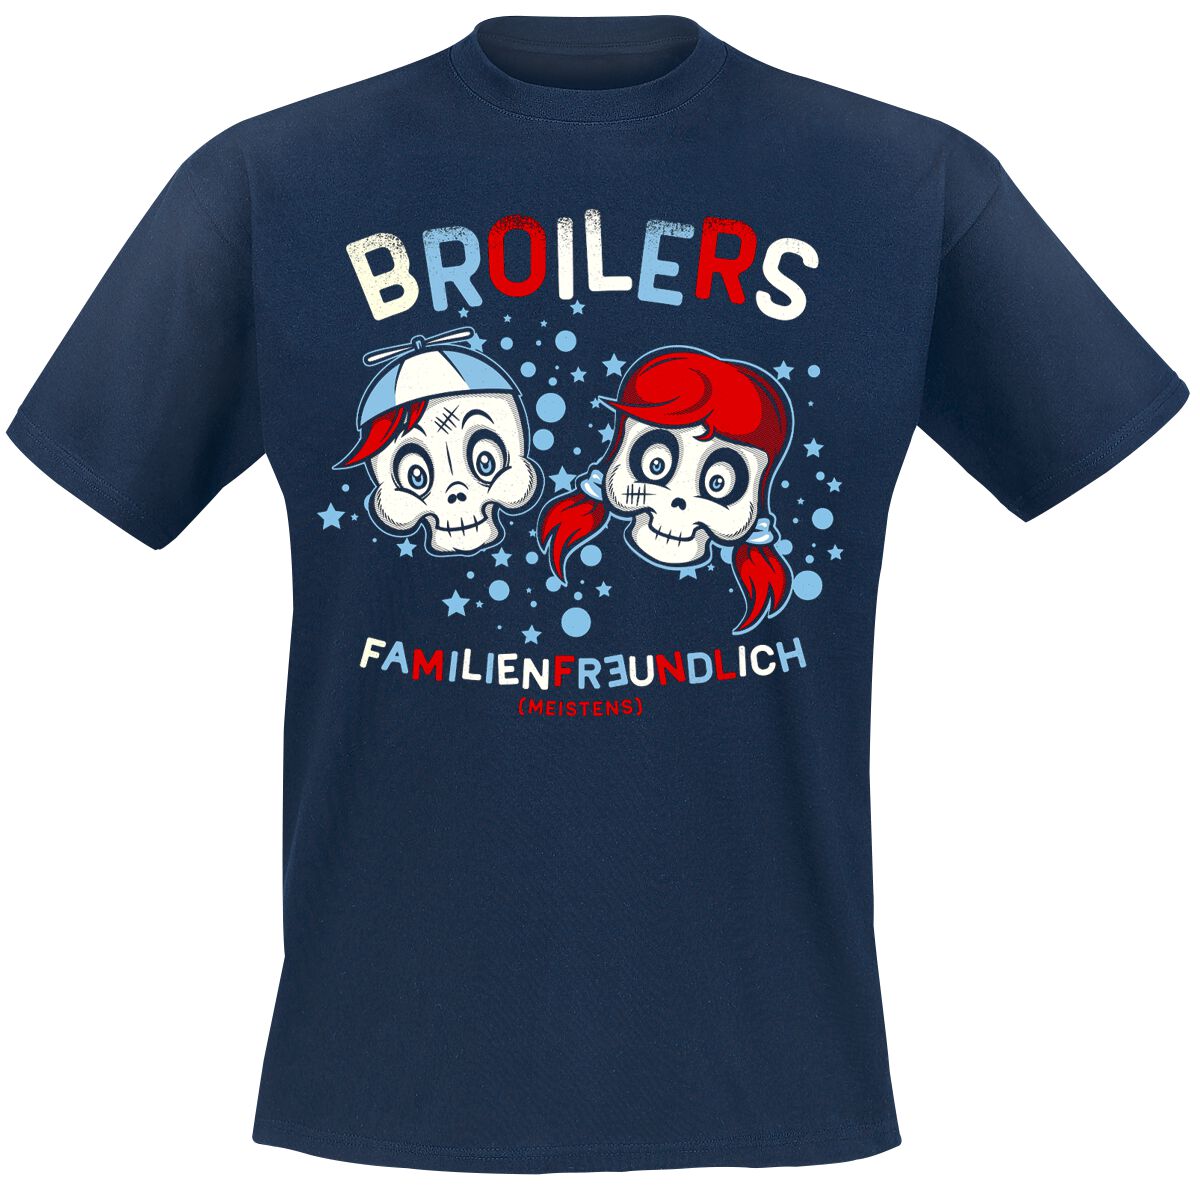 Image of Broilers Familienfreundlich T-Shirt navy